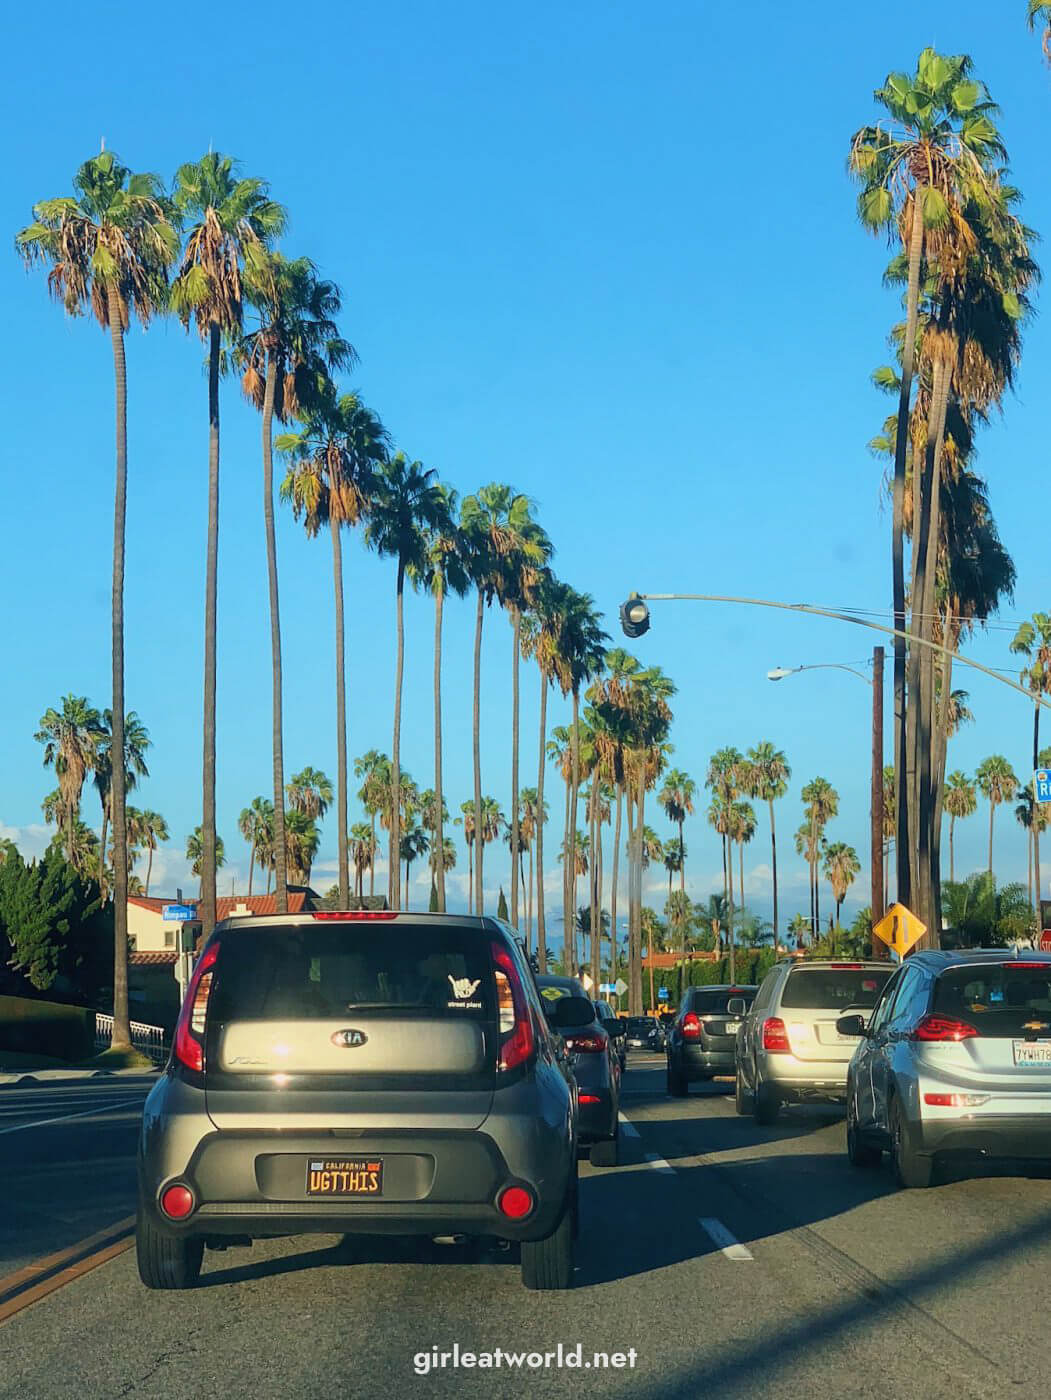 Los Angeles Itinerary - Palm Trees in LA